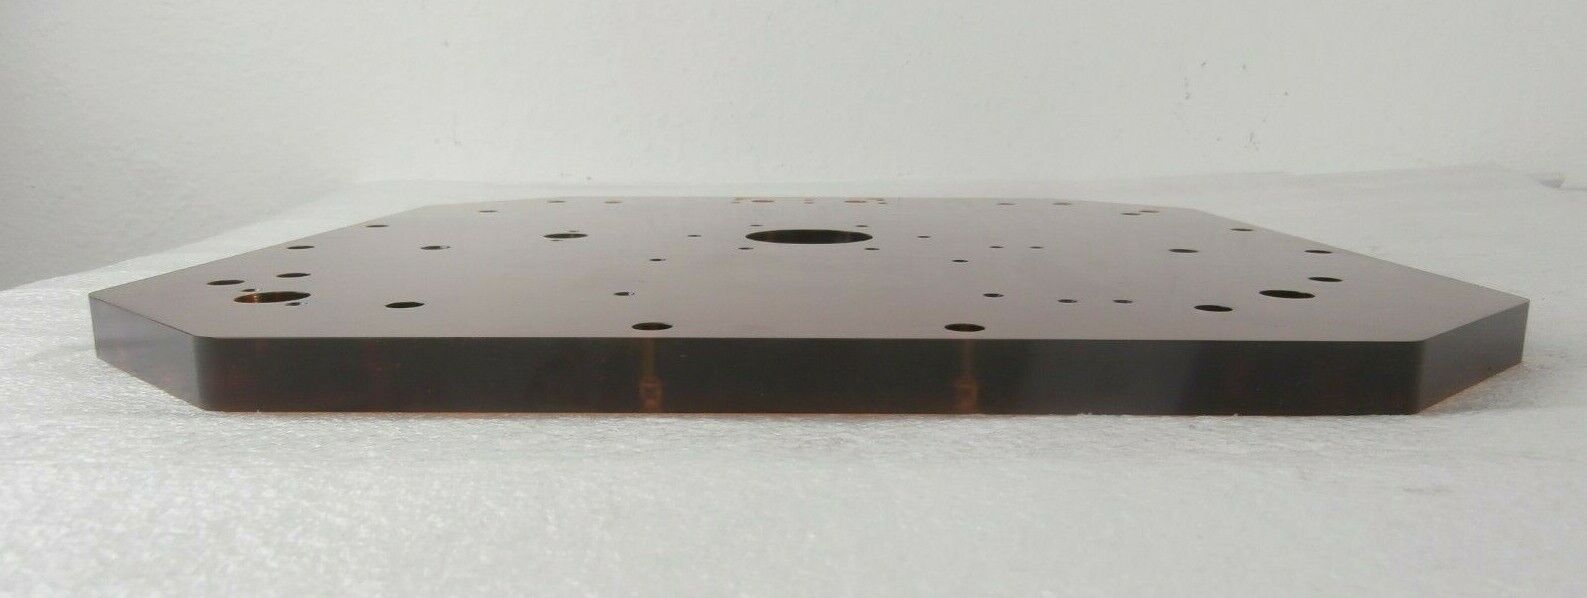 AMAT Applied Materials 00229-12004 12.9 Thin Housing Manufacturer Refurbished